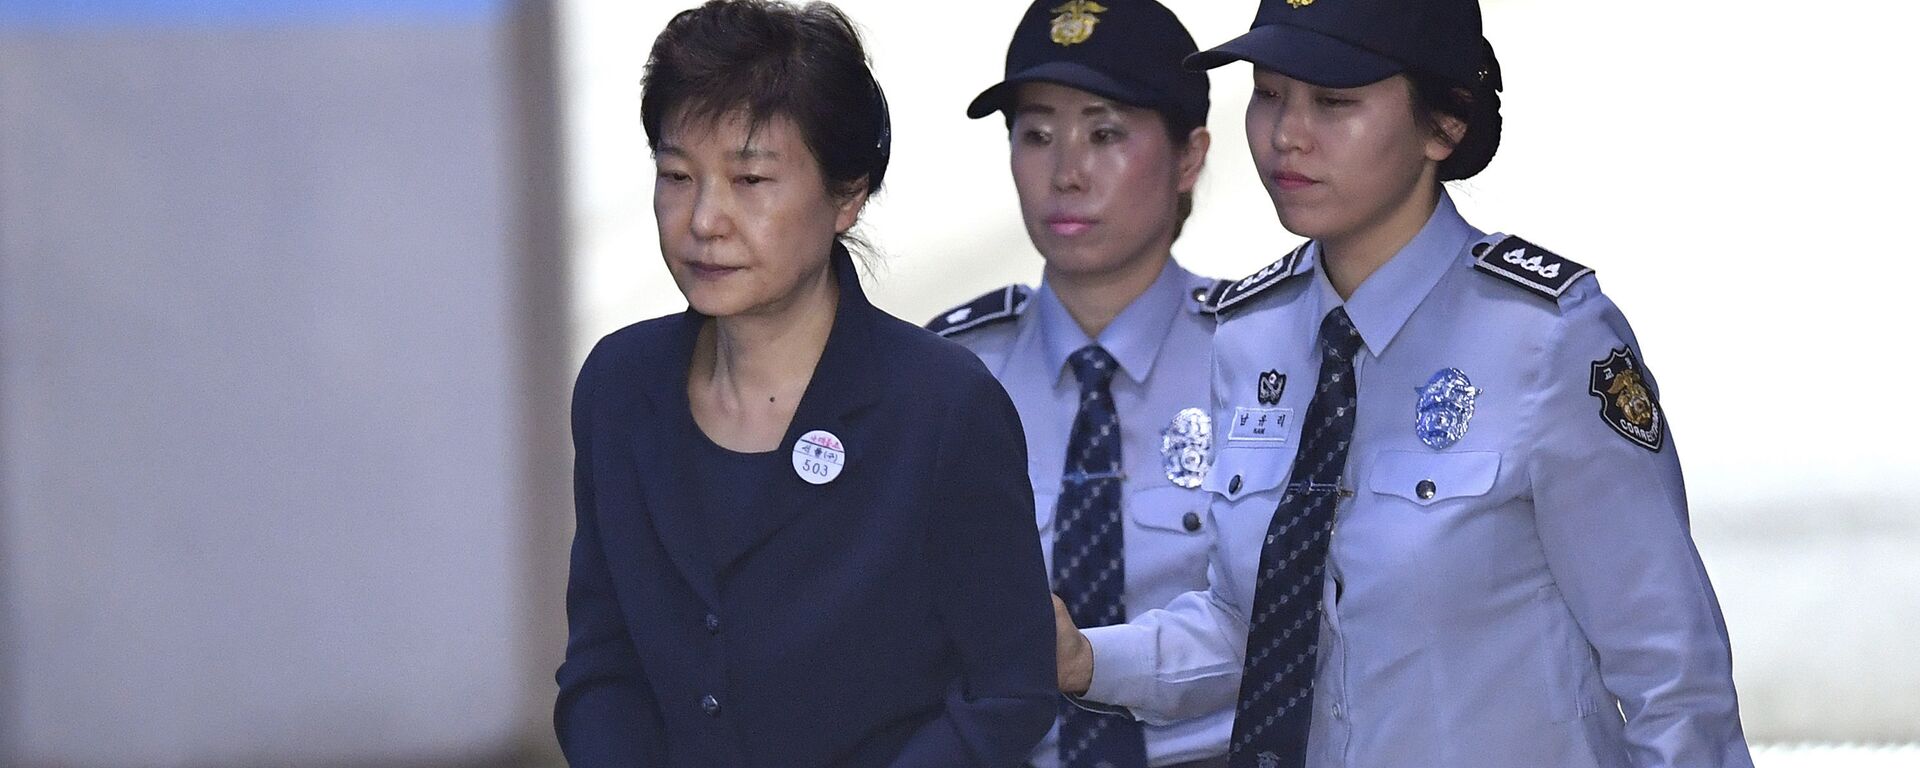 South Korean ousted leader Park Geun-hye, left, arrives for her trial at the Seoul Central District Court in Seoul Thursday, May 25, 2017 - Sputnik International, 1920, 24.12.2021